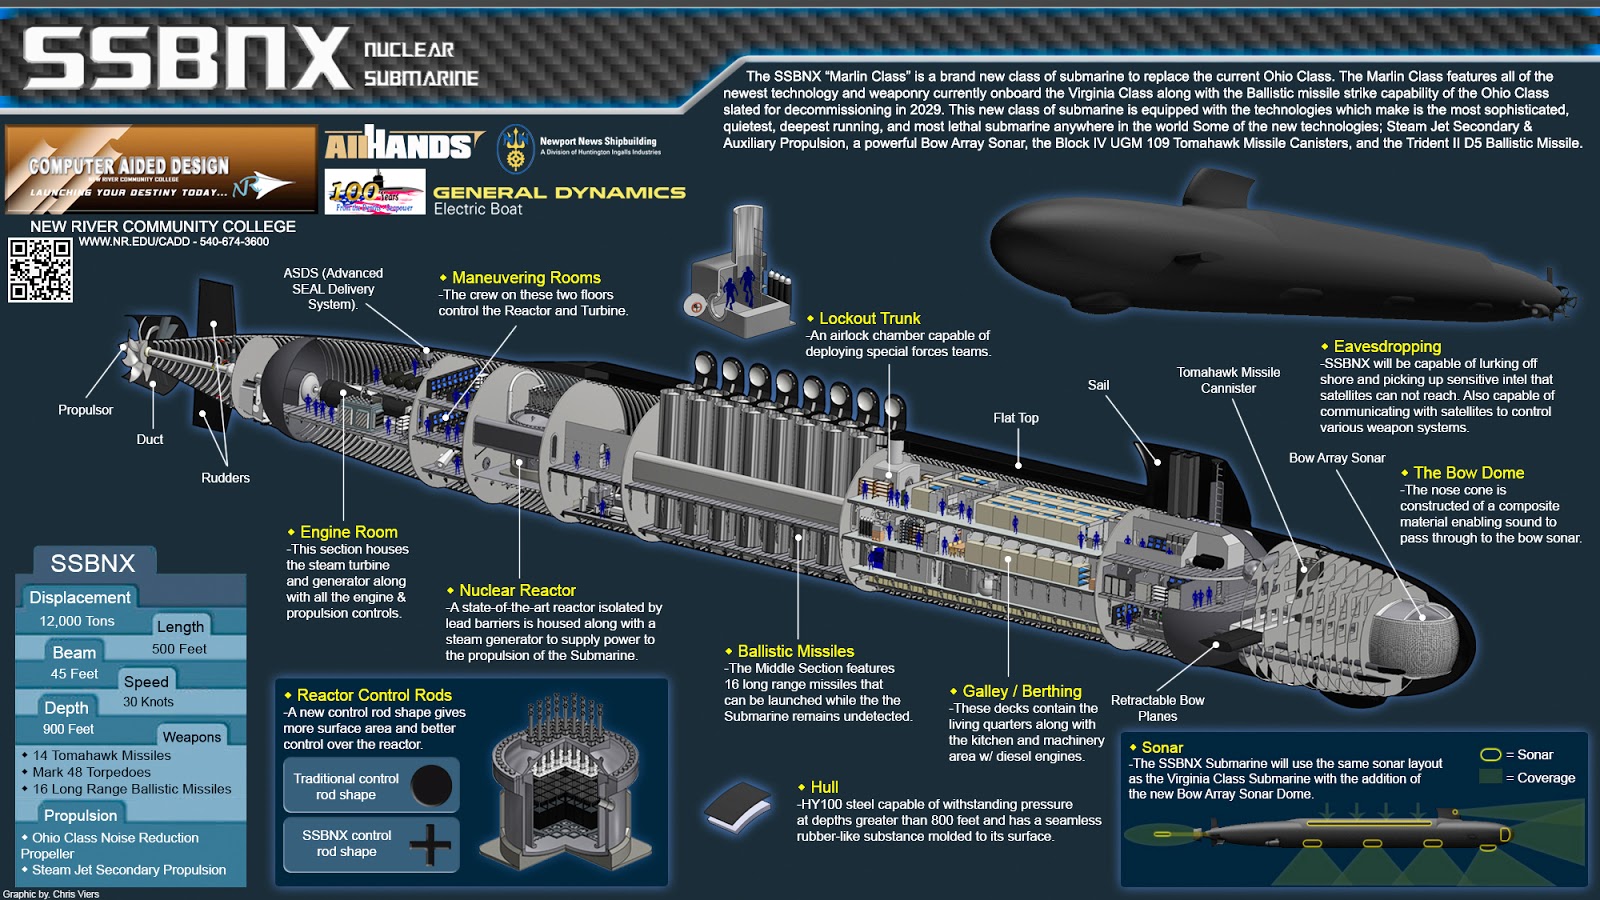 War News Updates: A Look At The U.S. Navy's New Class Of Nuclear